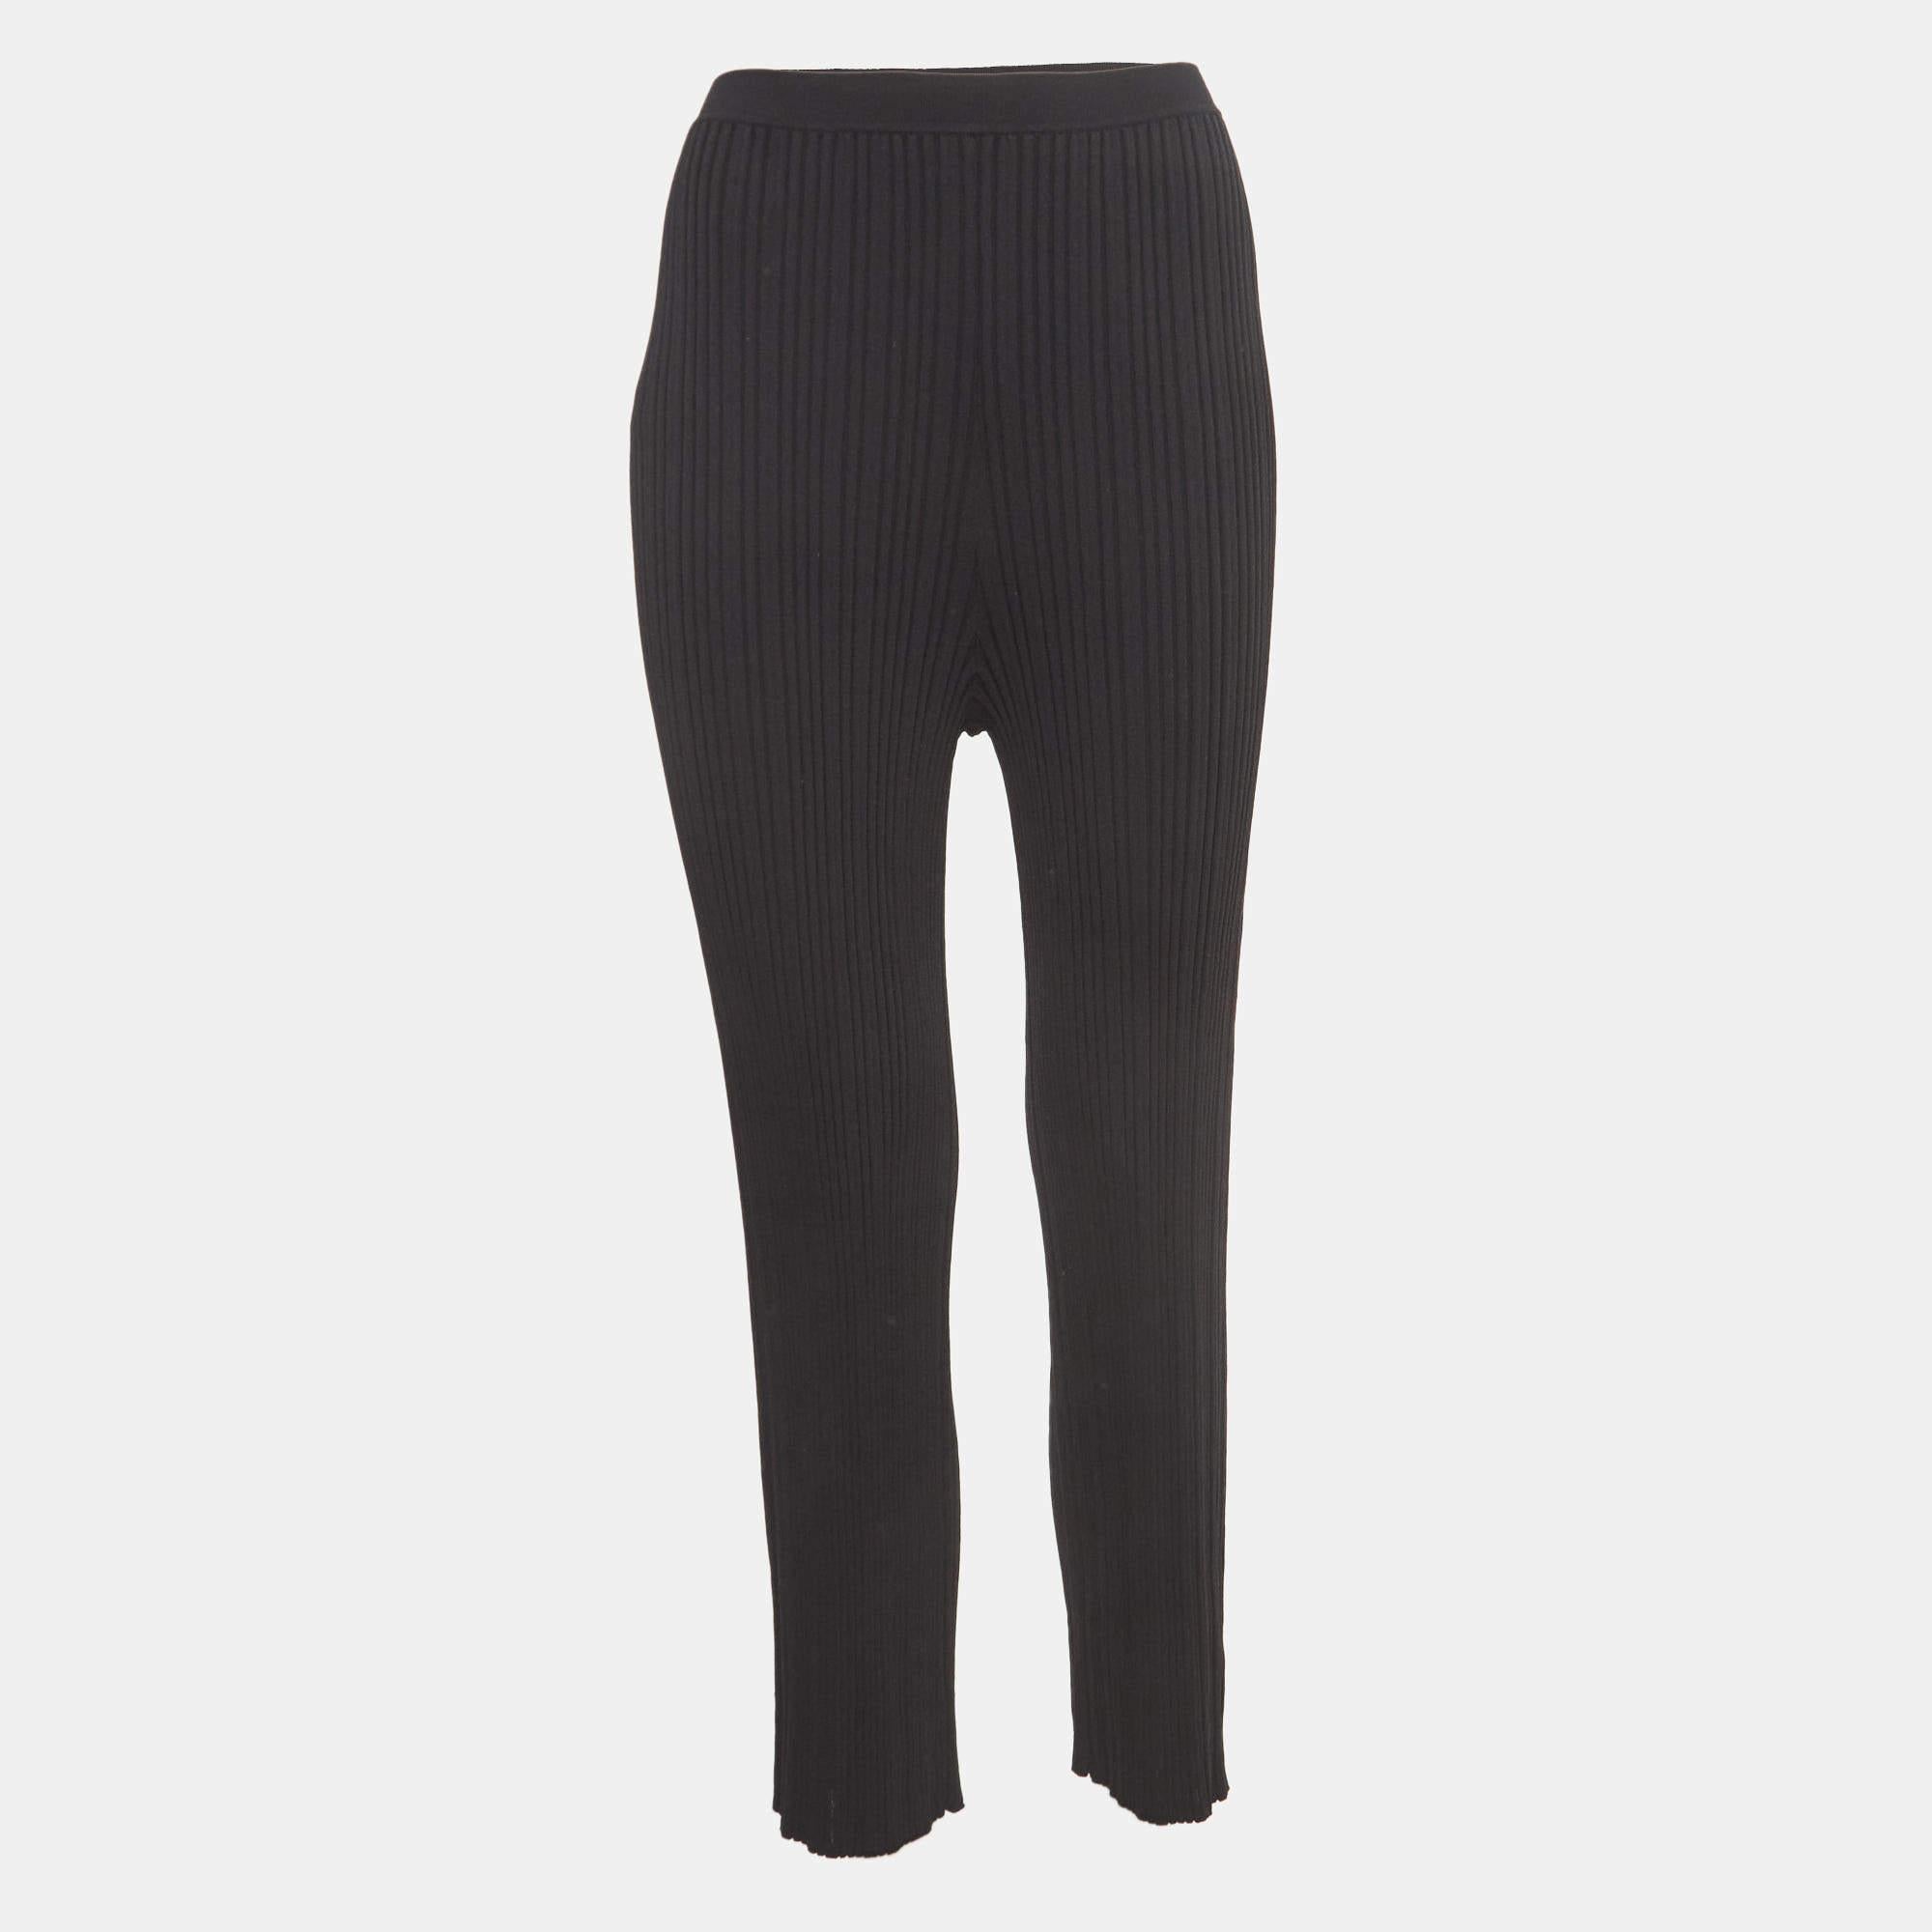 Dion Lee's float pants are a chic blend of comfort and style. Crafted from rib-knit fabric, these pants feature an elasticated waist for a customizable fit and a relaxed, flowing silhouette that effortlessly combines casual sophistication with